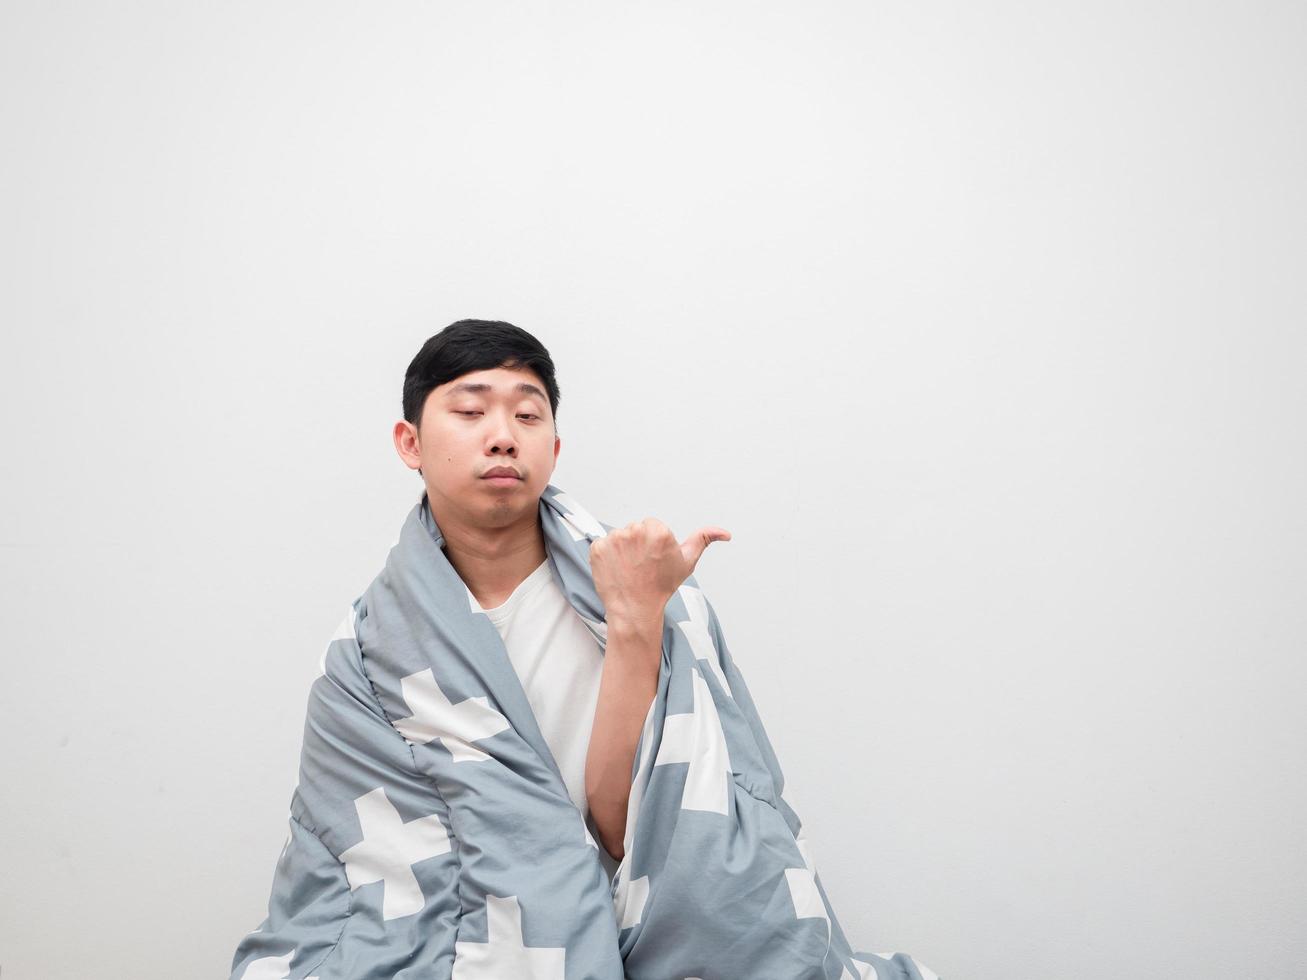 Asian man cover body by blanket and bored face point finger right side copy space on white background,Don't want to wake up concept photo